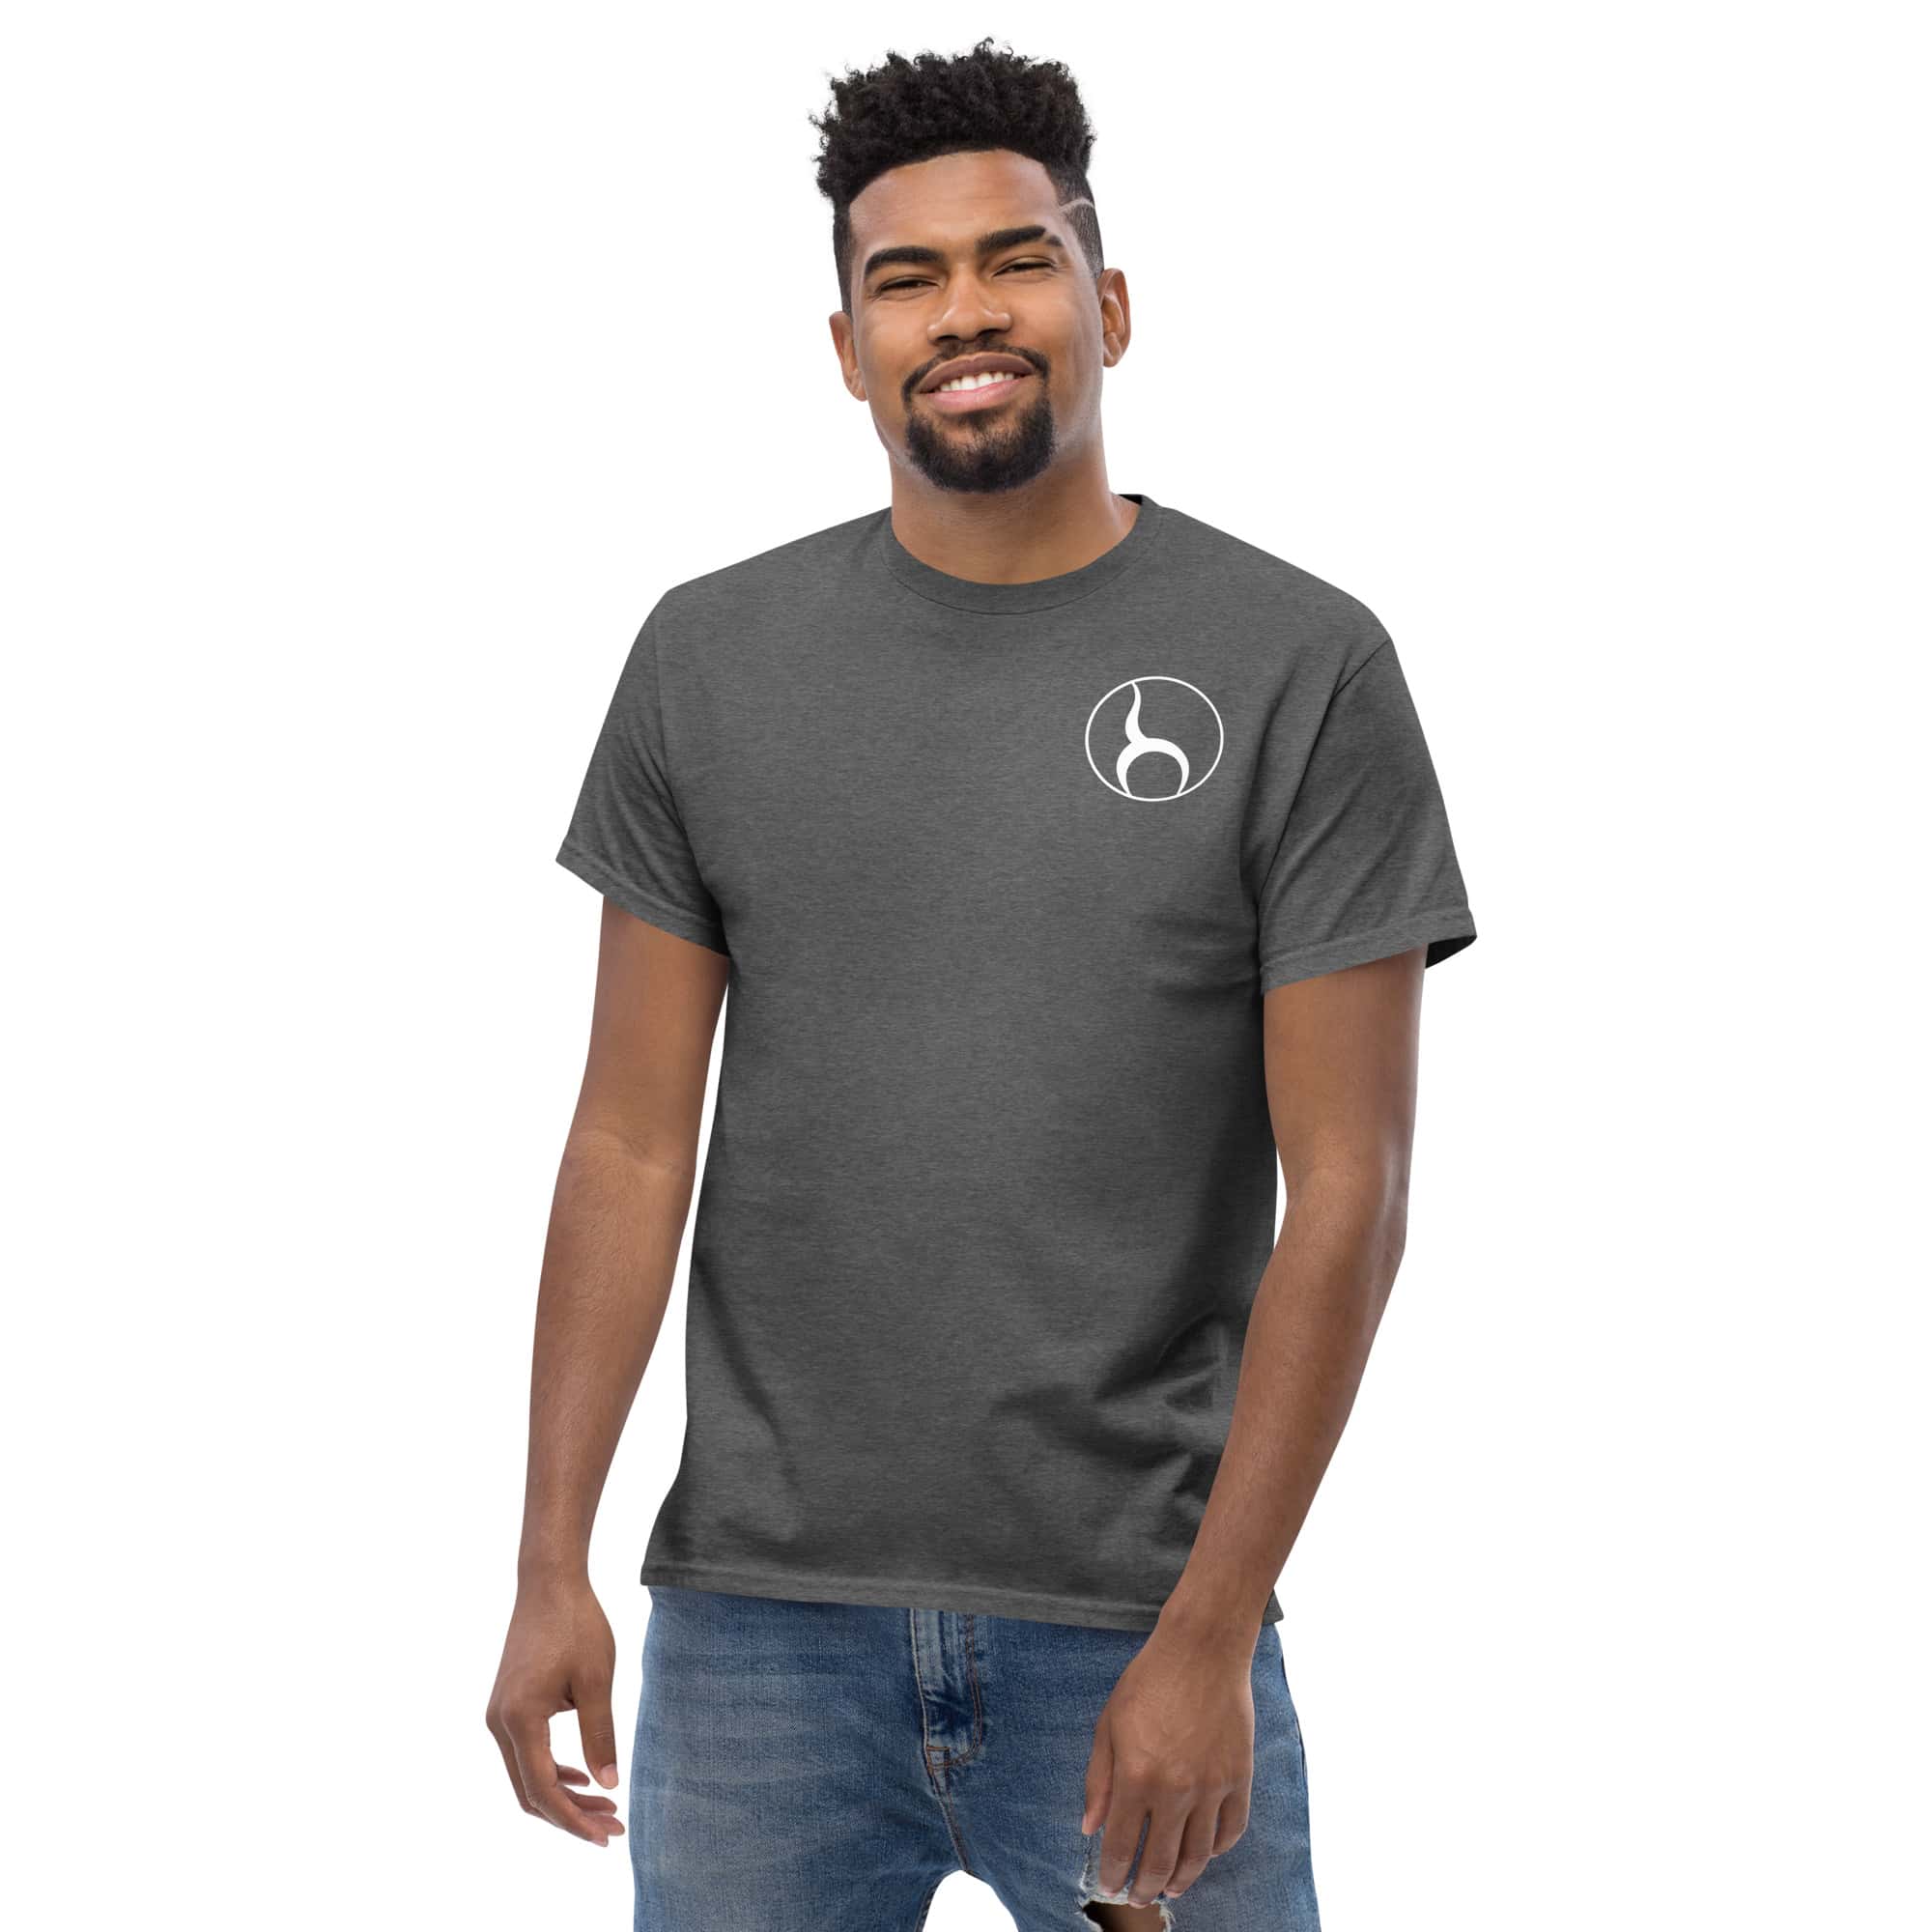 mens-classic-tee-dark-heather-front-2-65036a765f57a